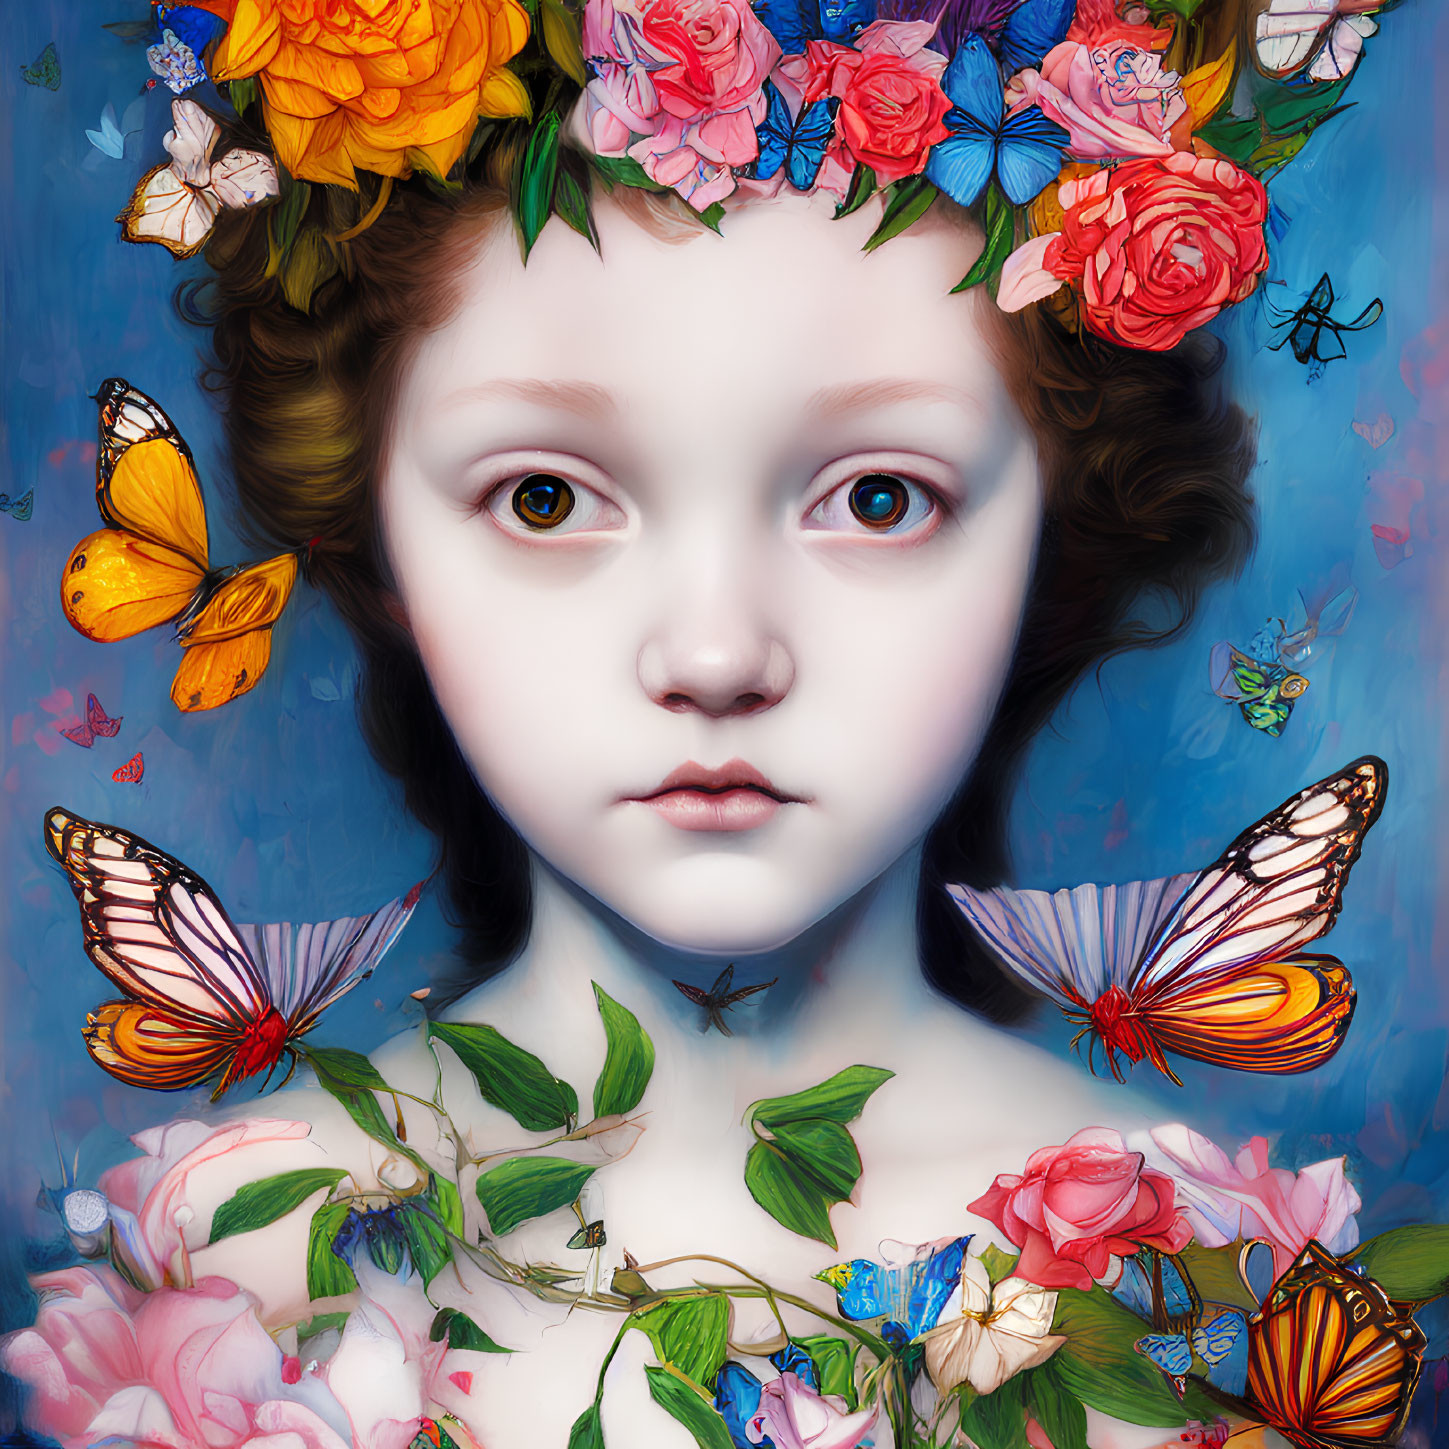 Colorful surreal portrait of young girl with expressive eyes and floral crown, surrounded by vibrant butterflies on blue